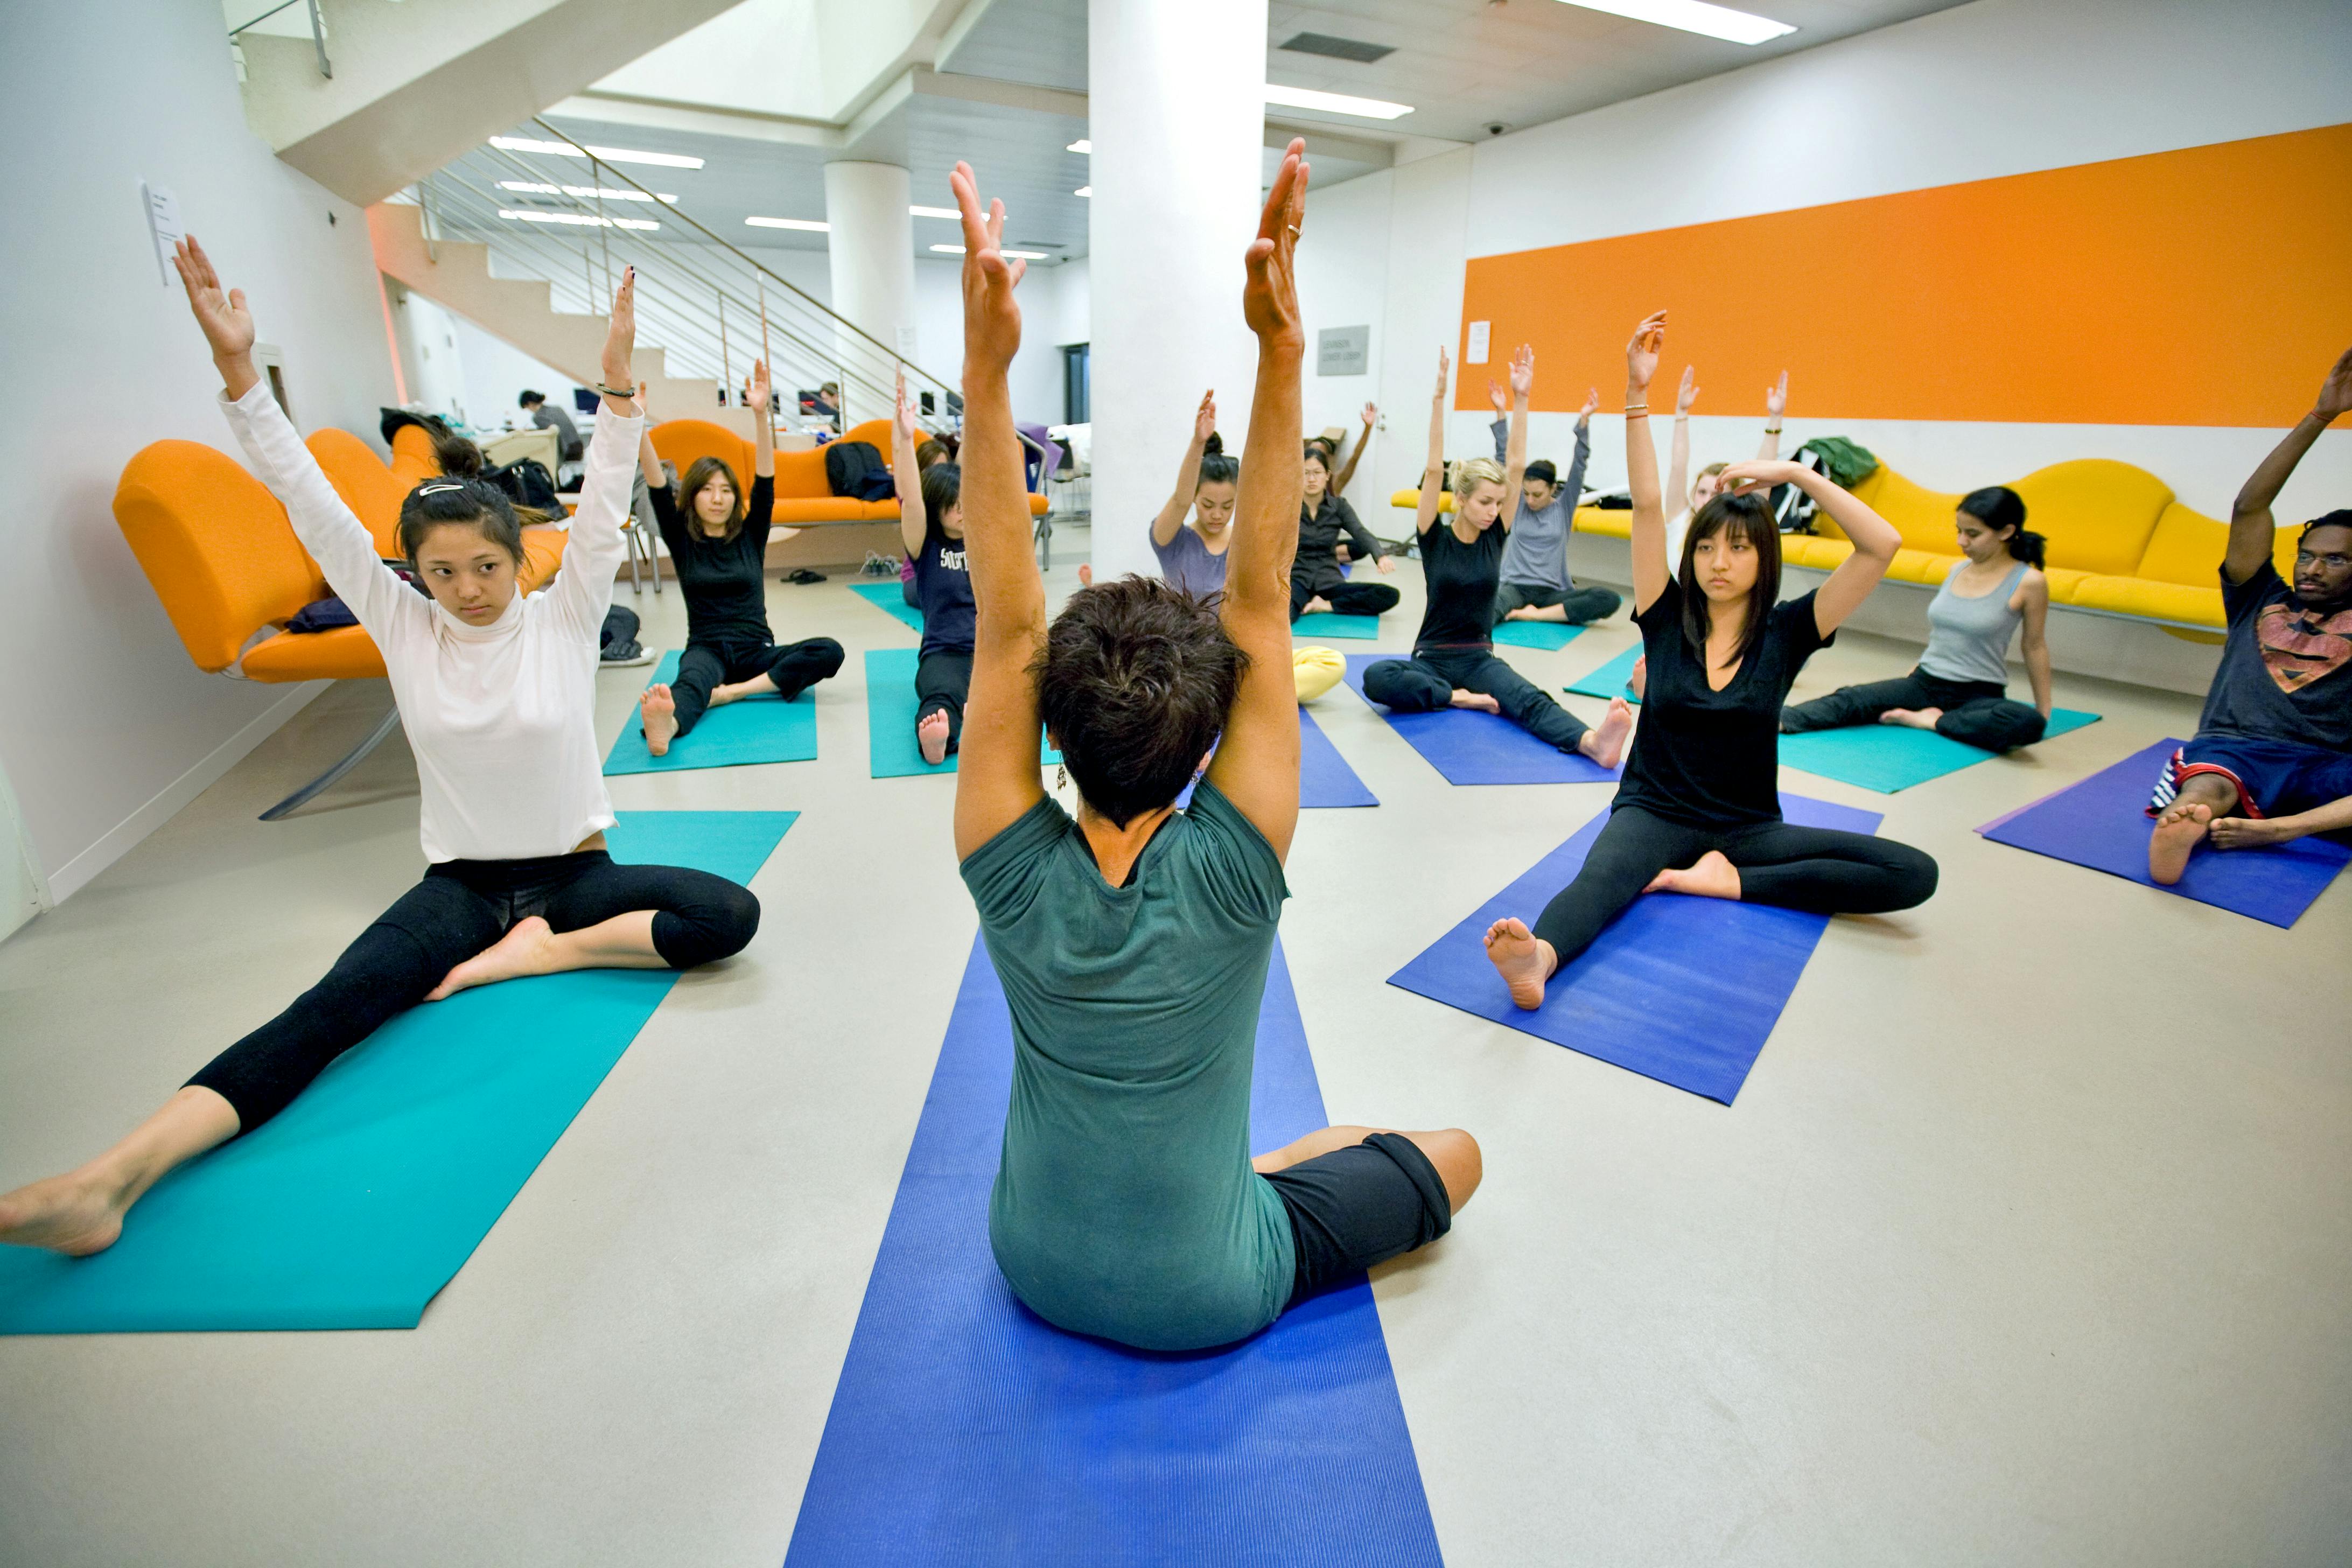 A group of students taking a yoga class.